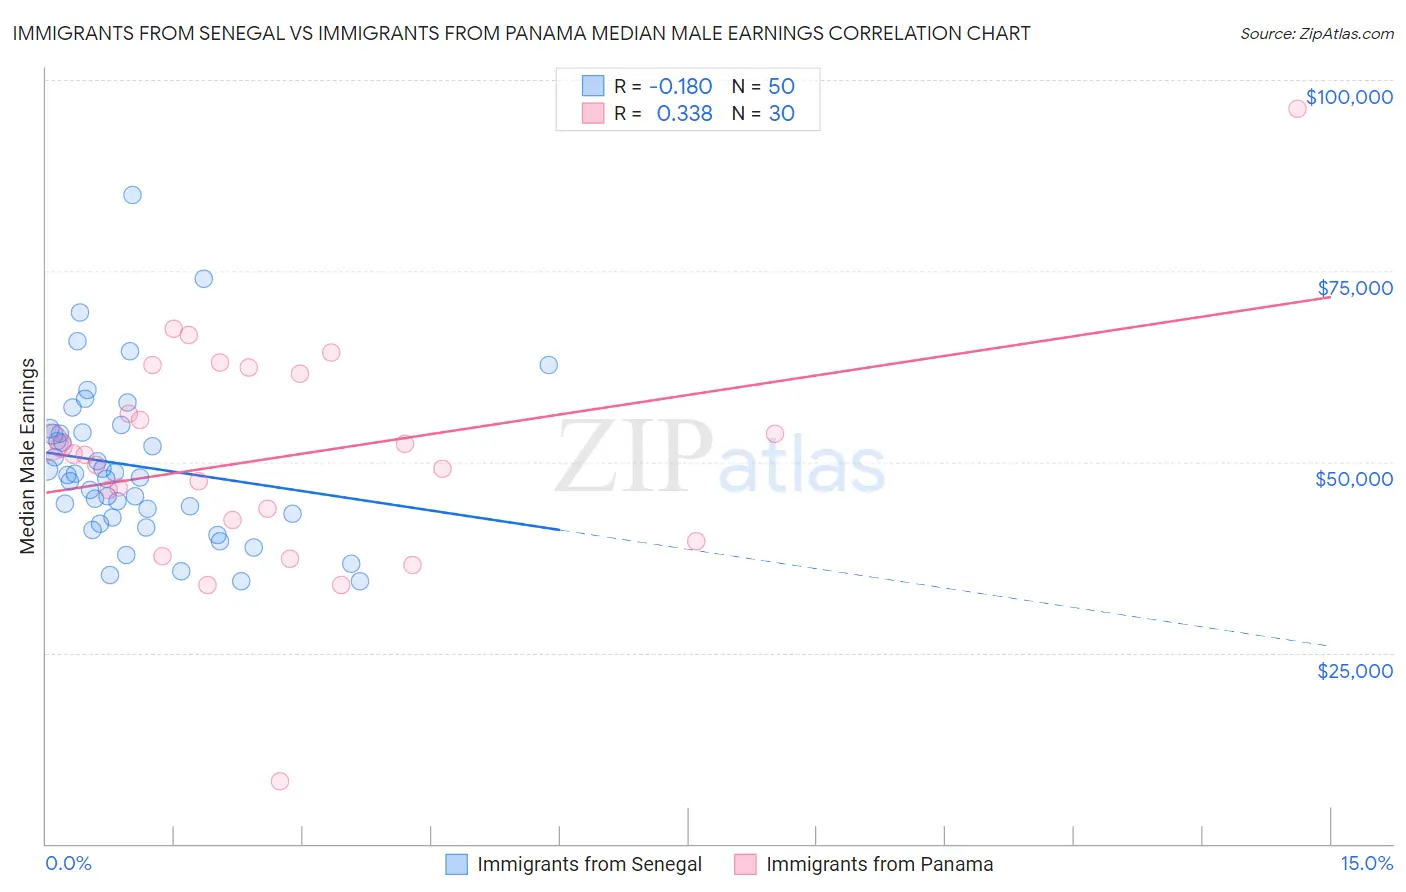 Immigrants from Senegal vs Immigrants from Panama Median Male Earnings